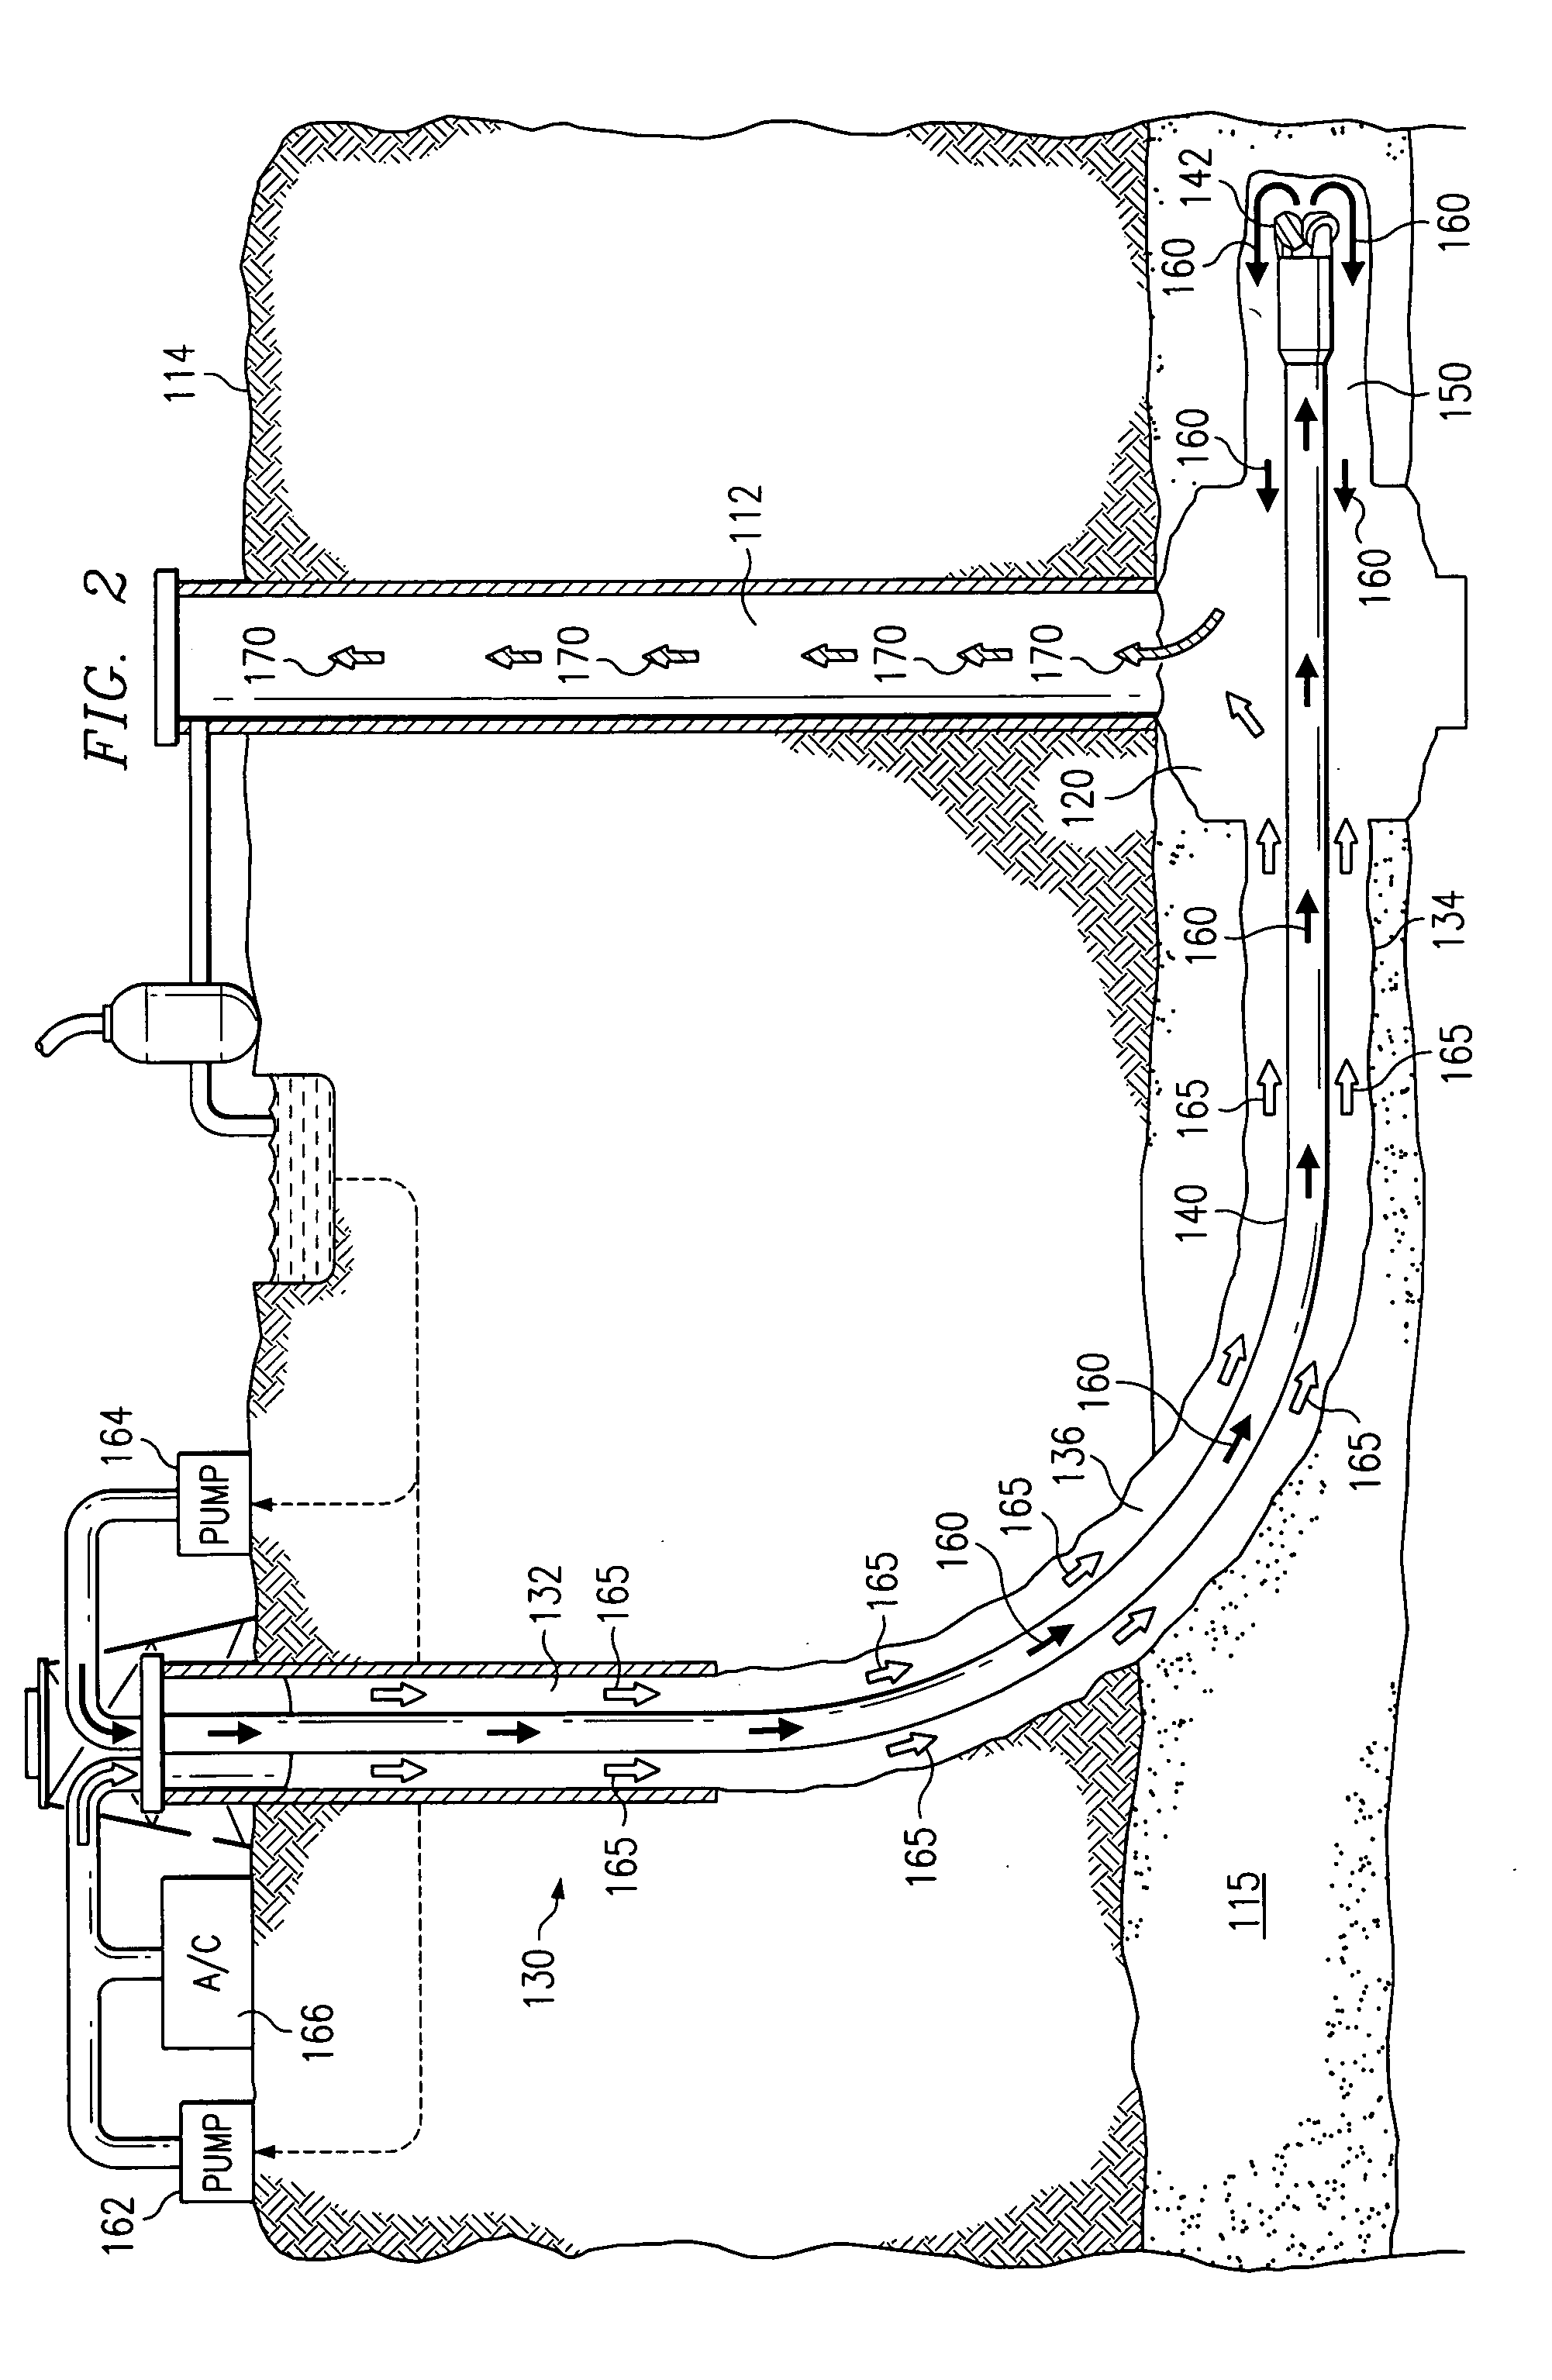 Method and system for controlling pressure in a dual well system